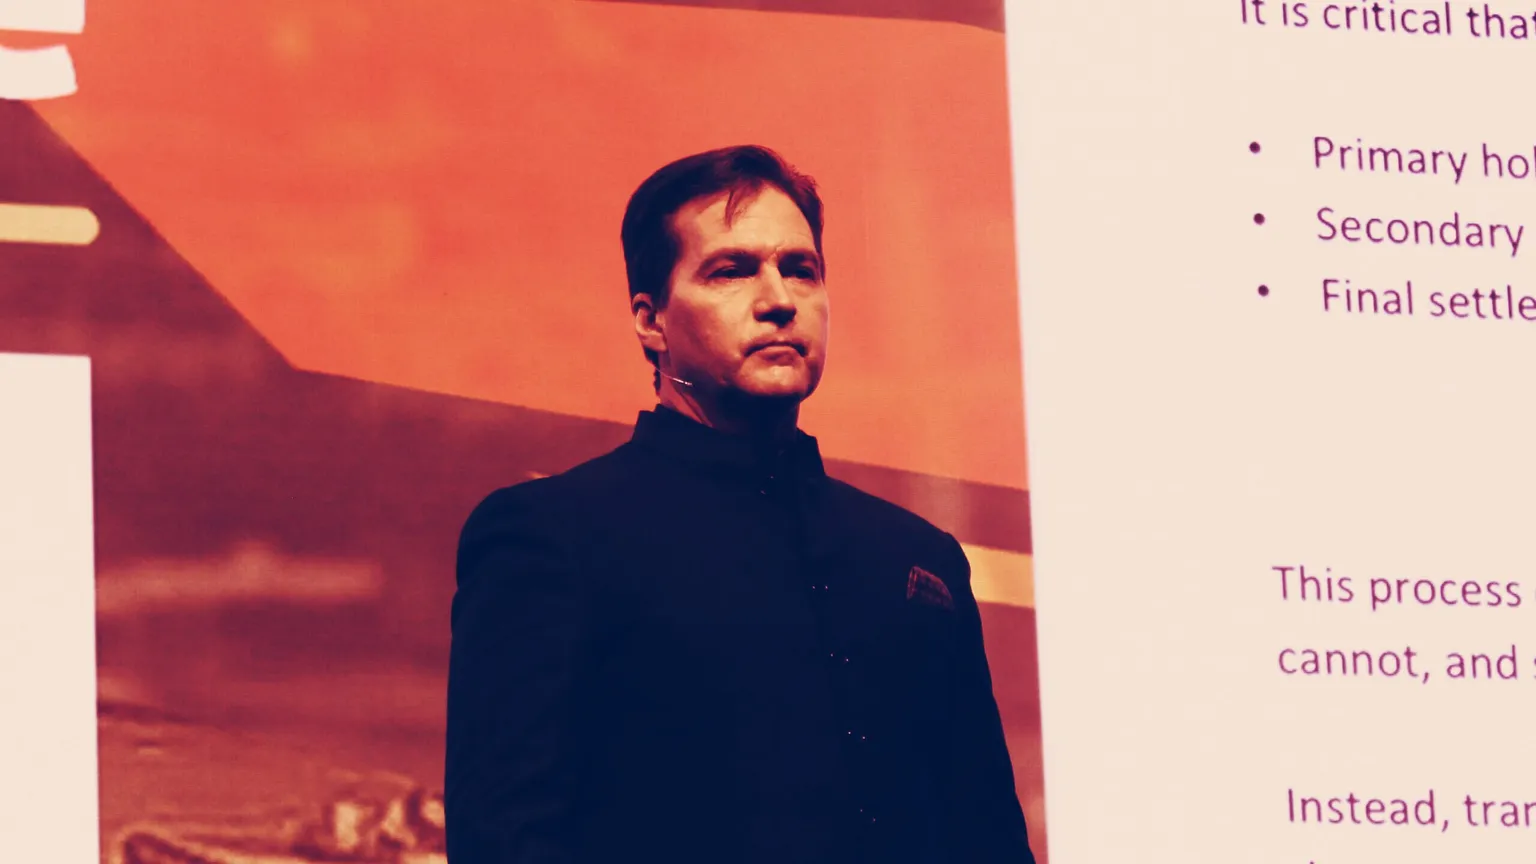 Self-proclaimed Bitcoin inventor Craig Wright speaking at Coingeek 2020. Image: Decrypt.